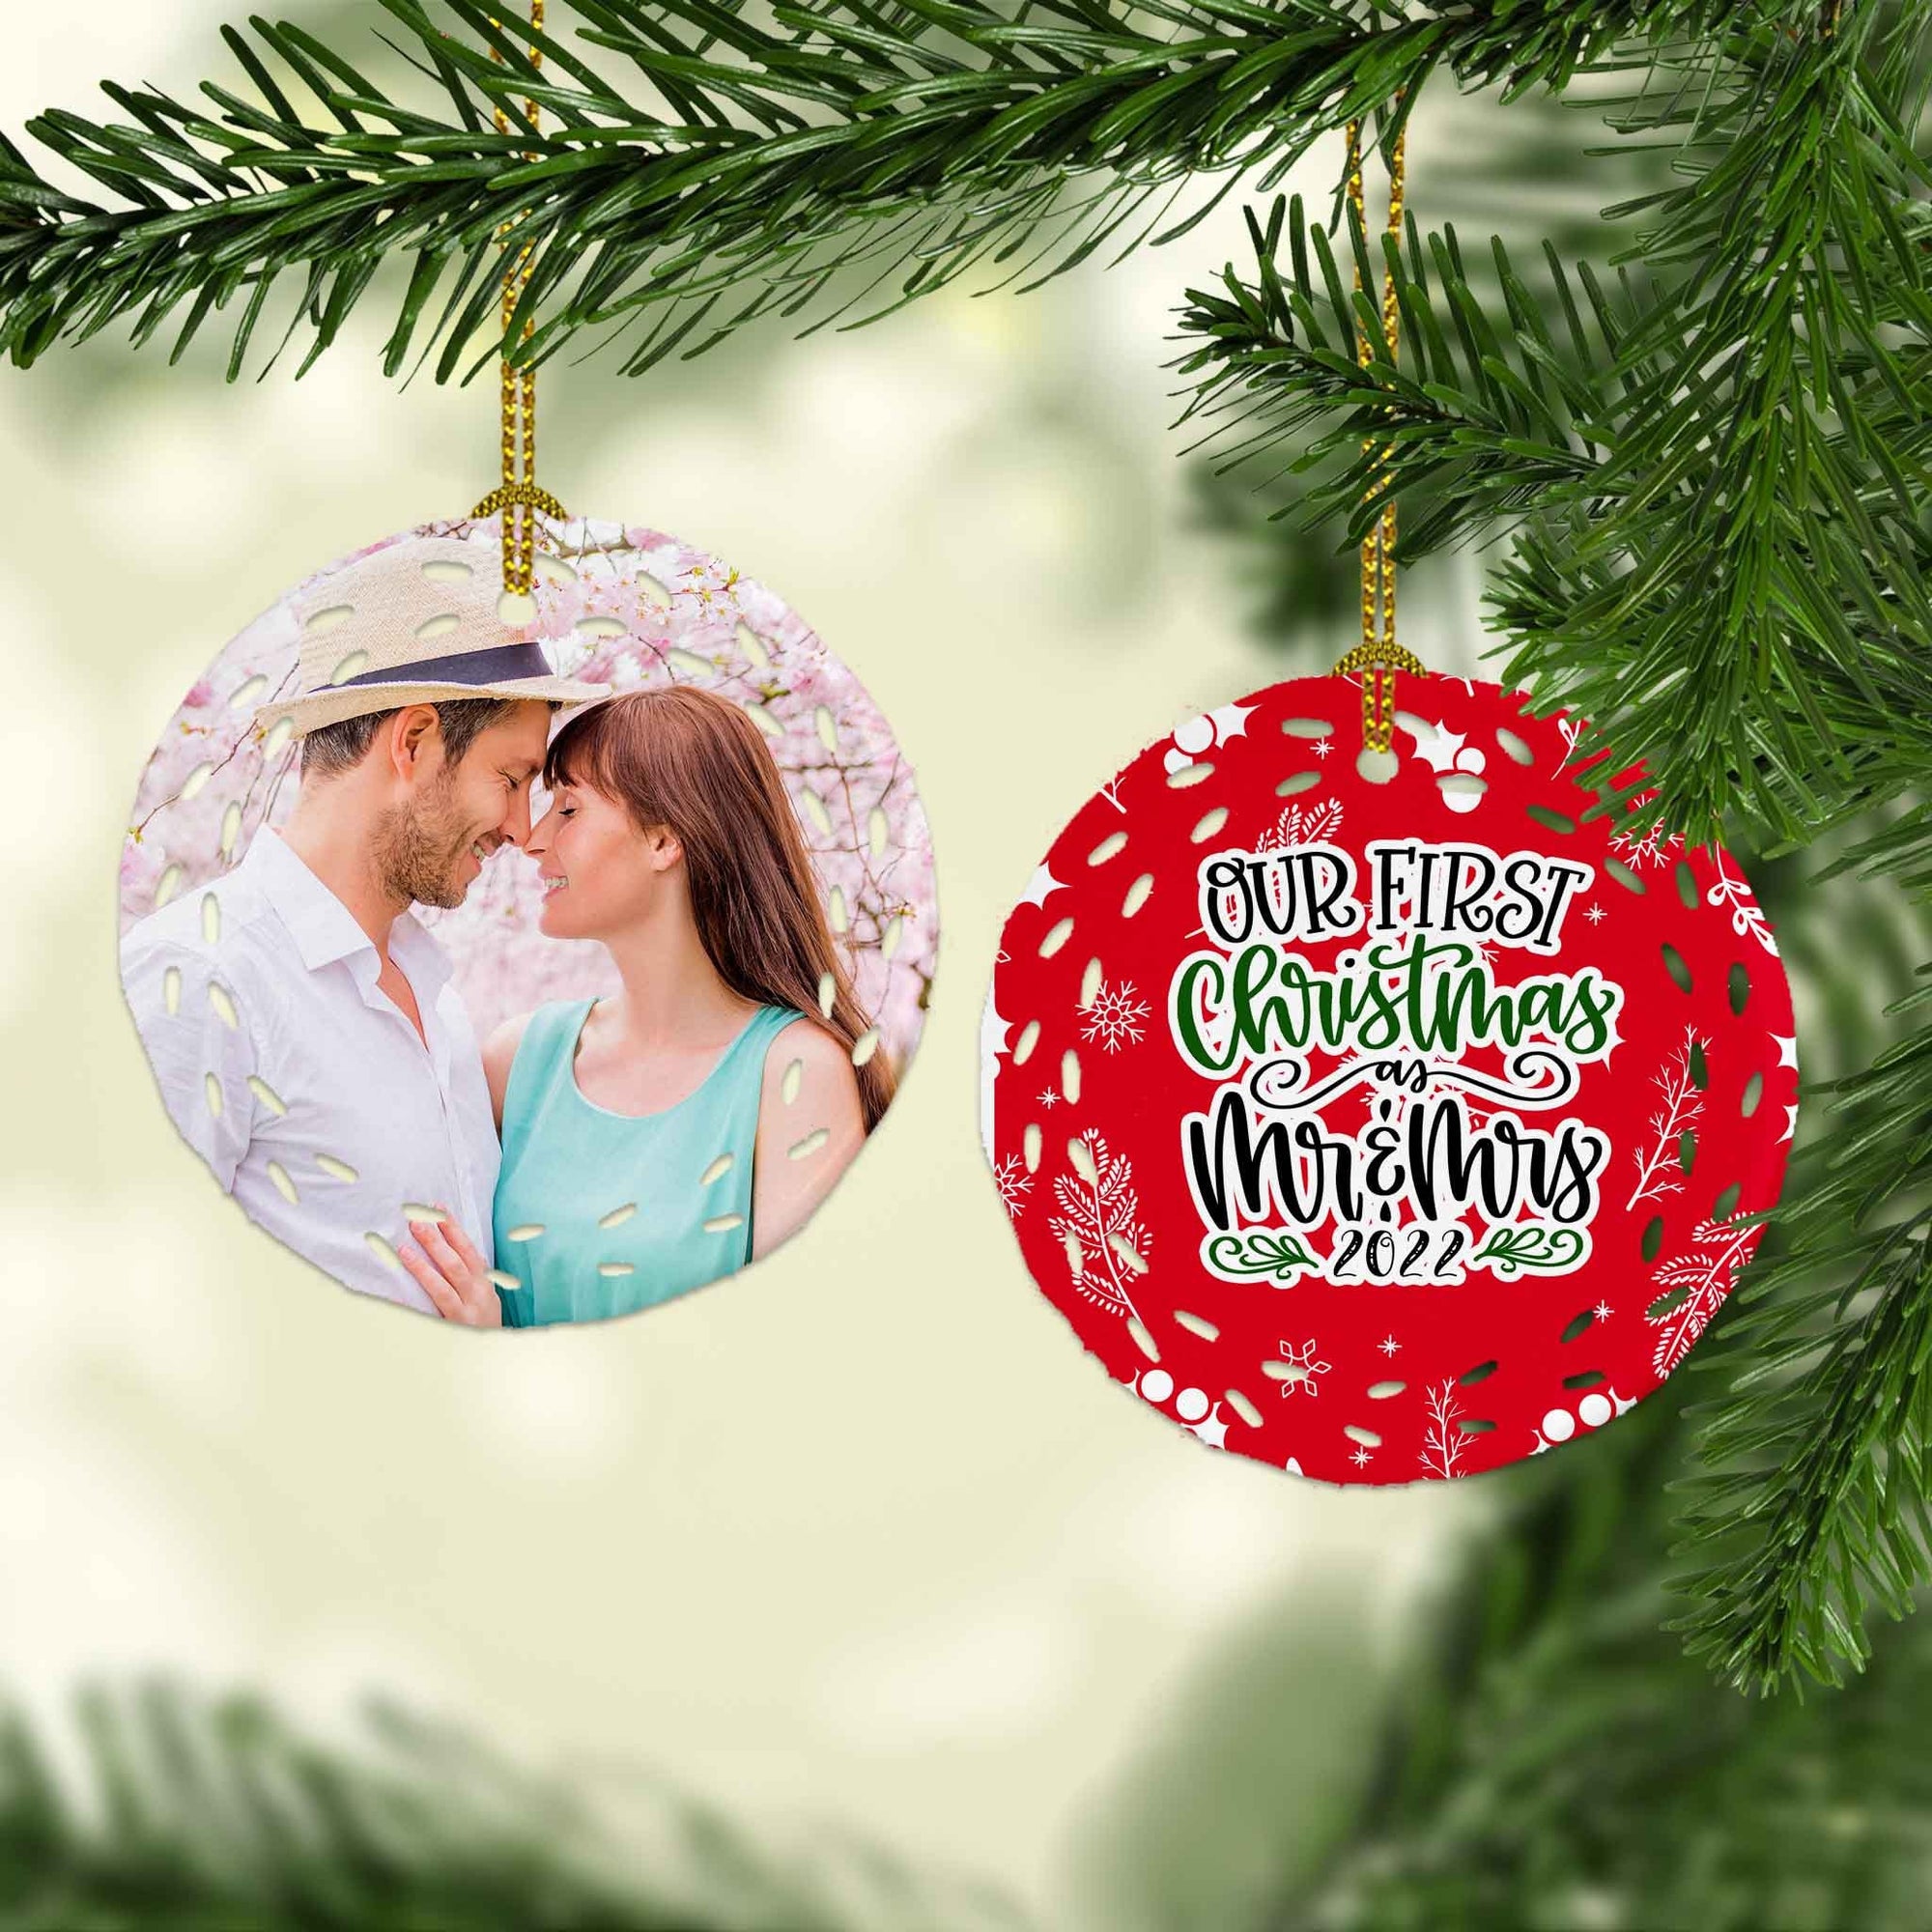 Photo Holiday Ornaments | Personalized Christmas Ornaments | Our First Christmas as Mr and Mrs Wreath